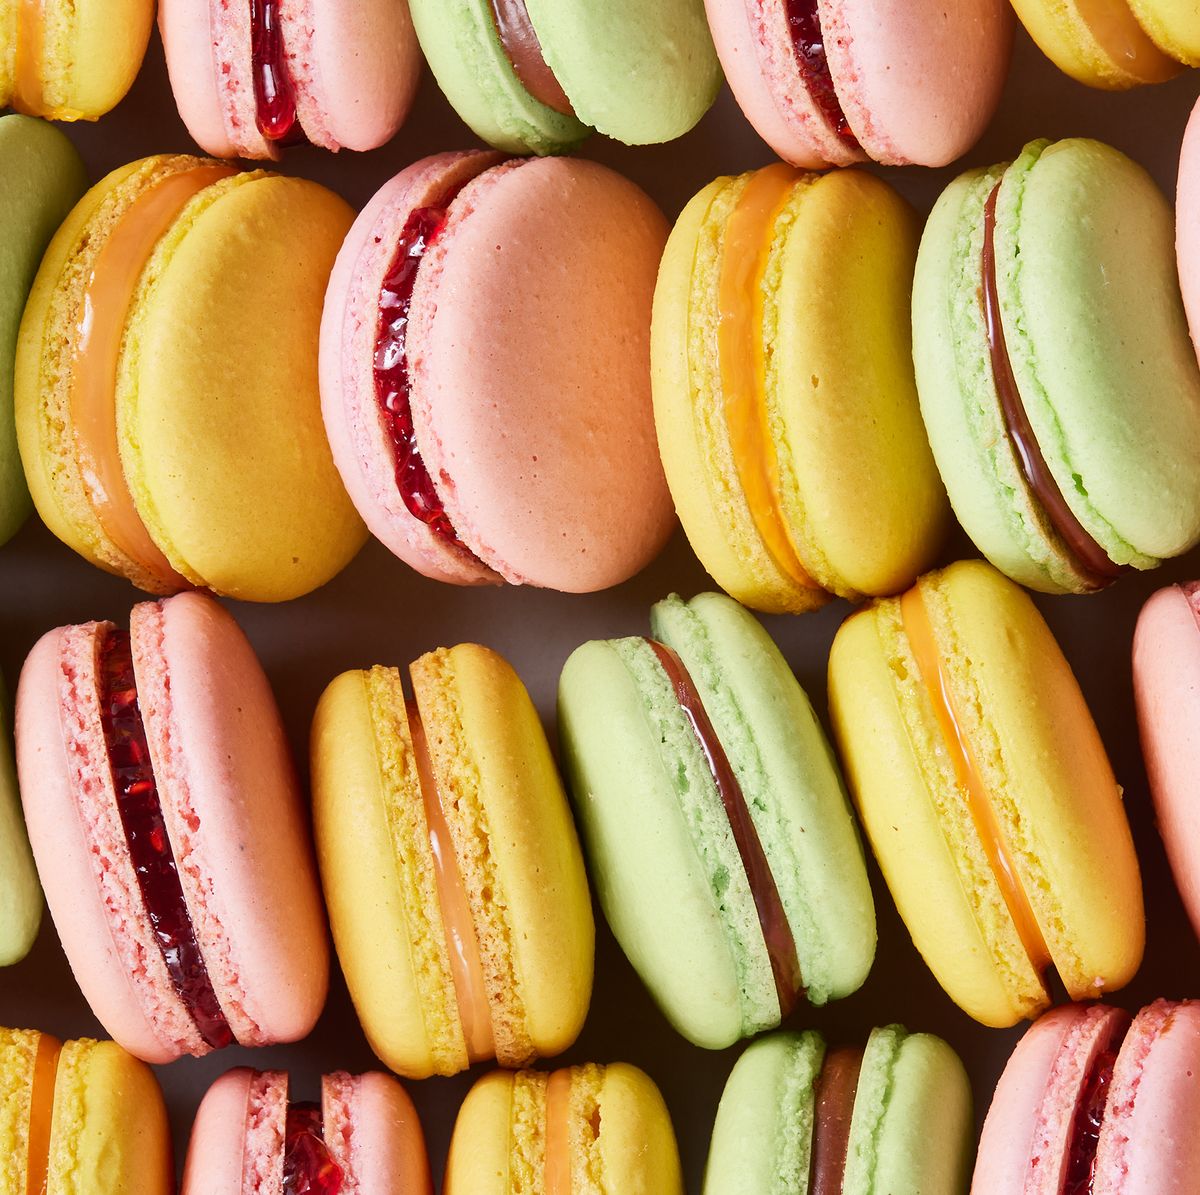 Best Macarons Recipe - How To Make French Macarons